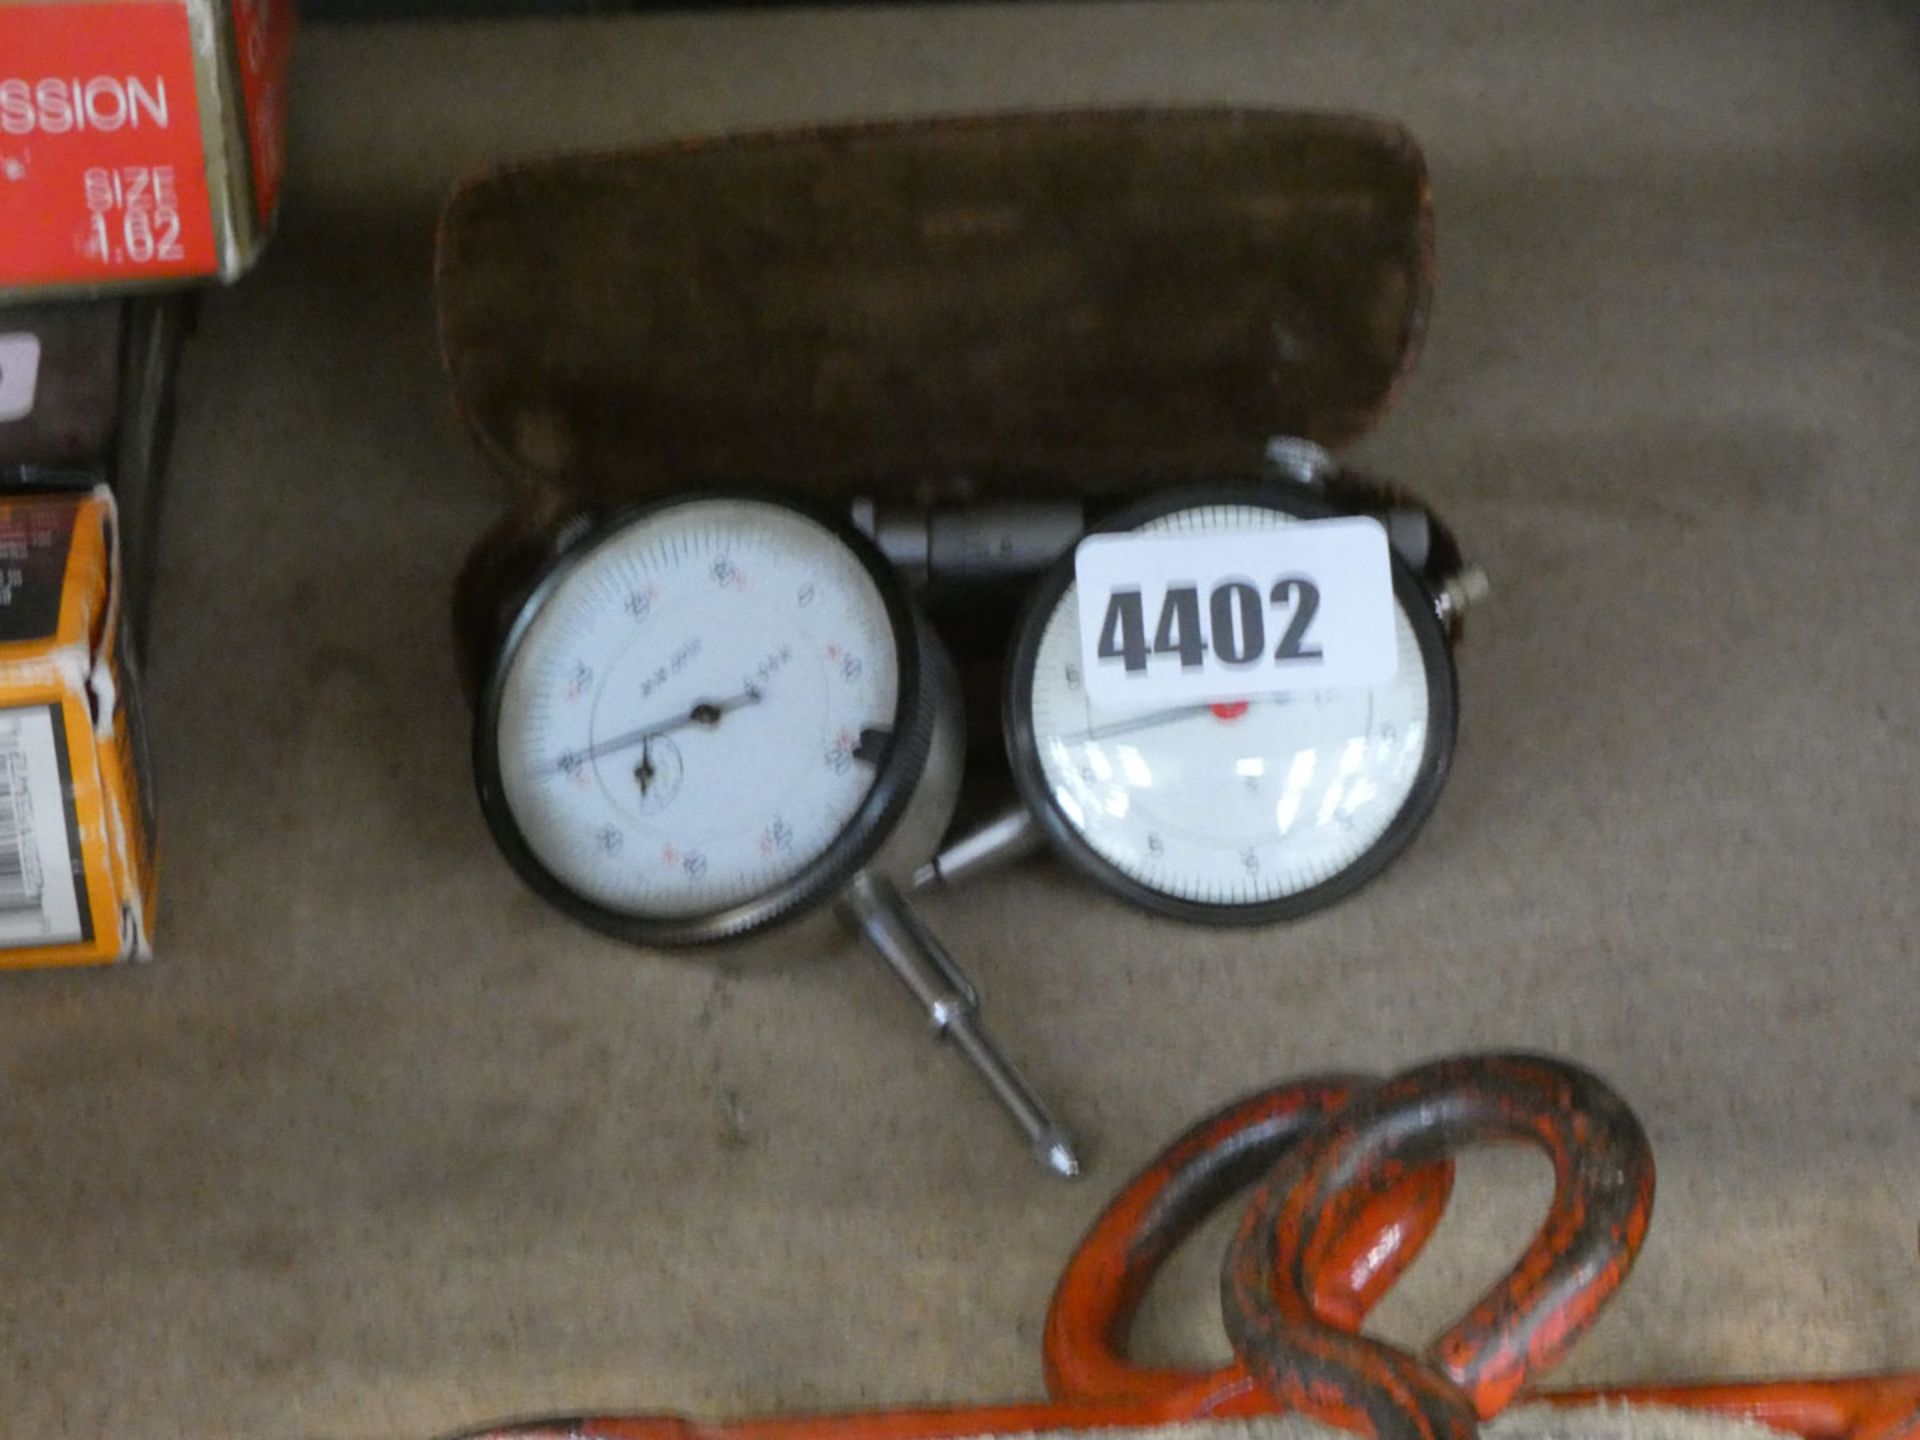 2 spring gauges and a micrometer